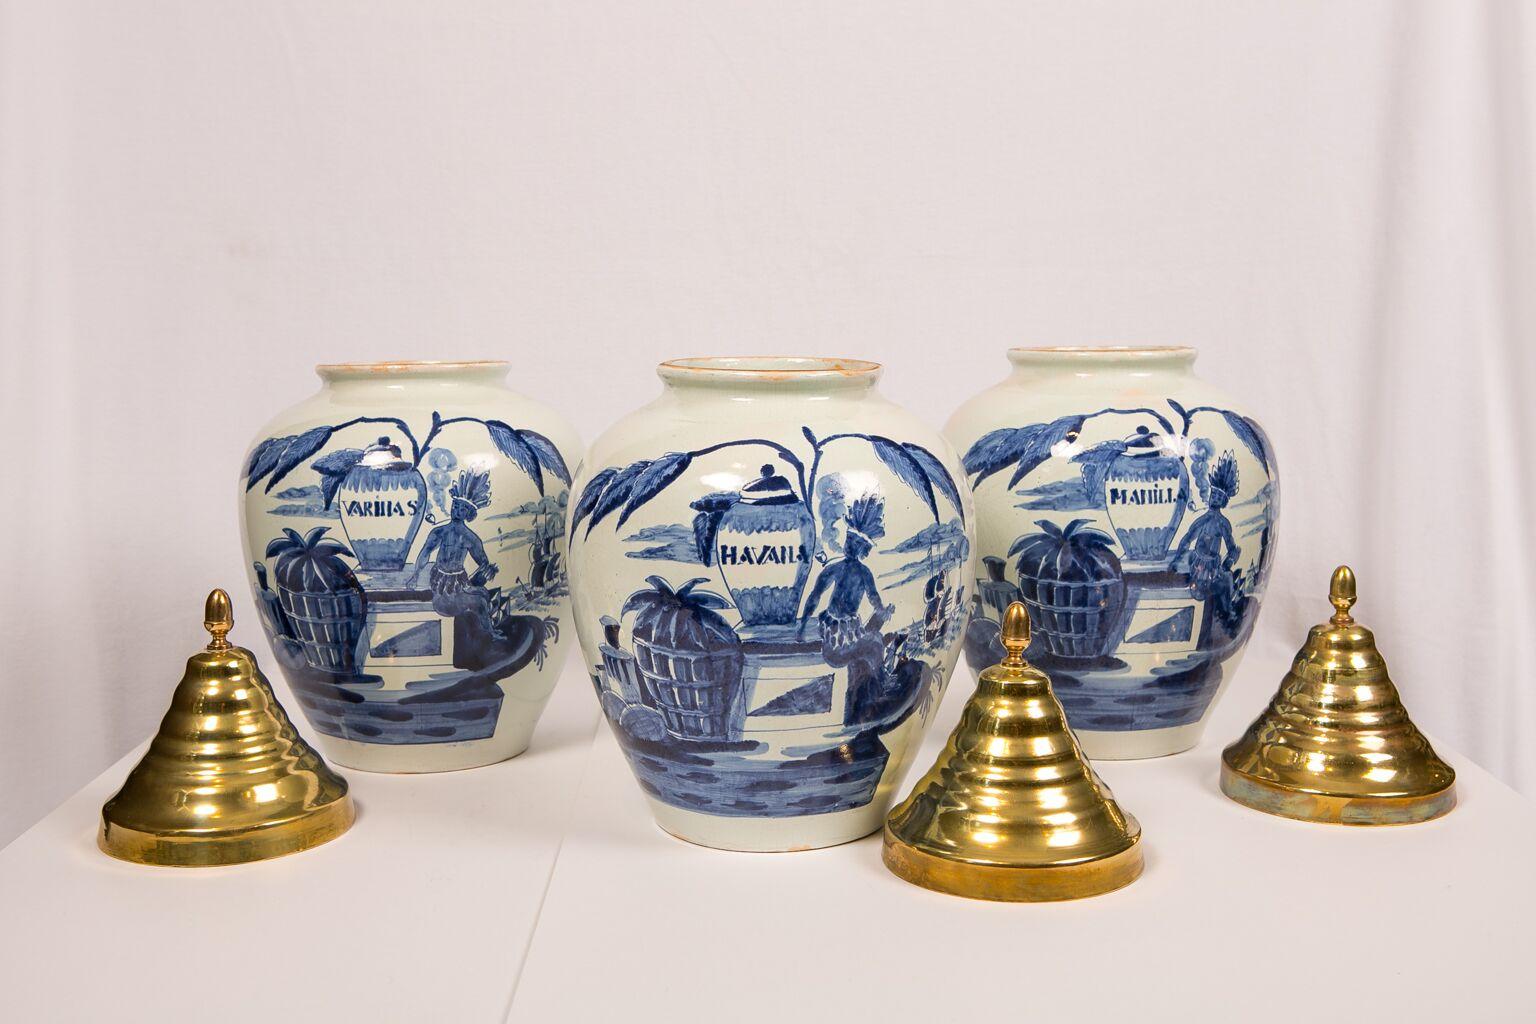 A set of three blue and white Dutch delft tobacco jars with brass covers each painted on the front with a Native American chieftain smoking a pipe. Each jar is inscribed with the locale from which the tobacco originated: 